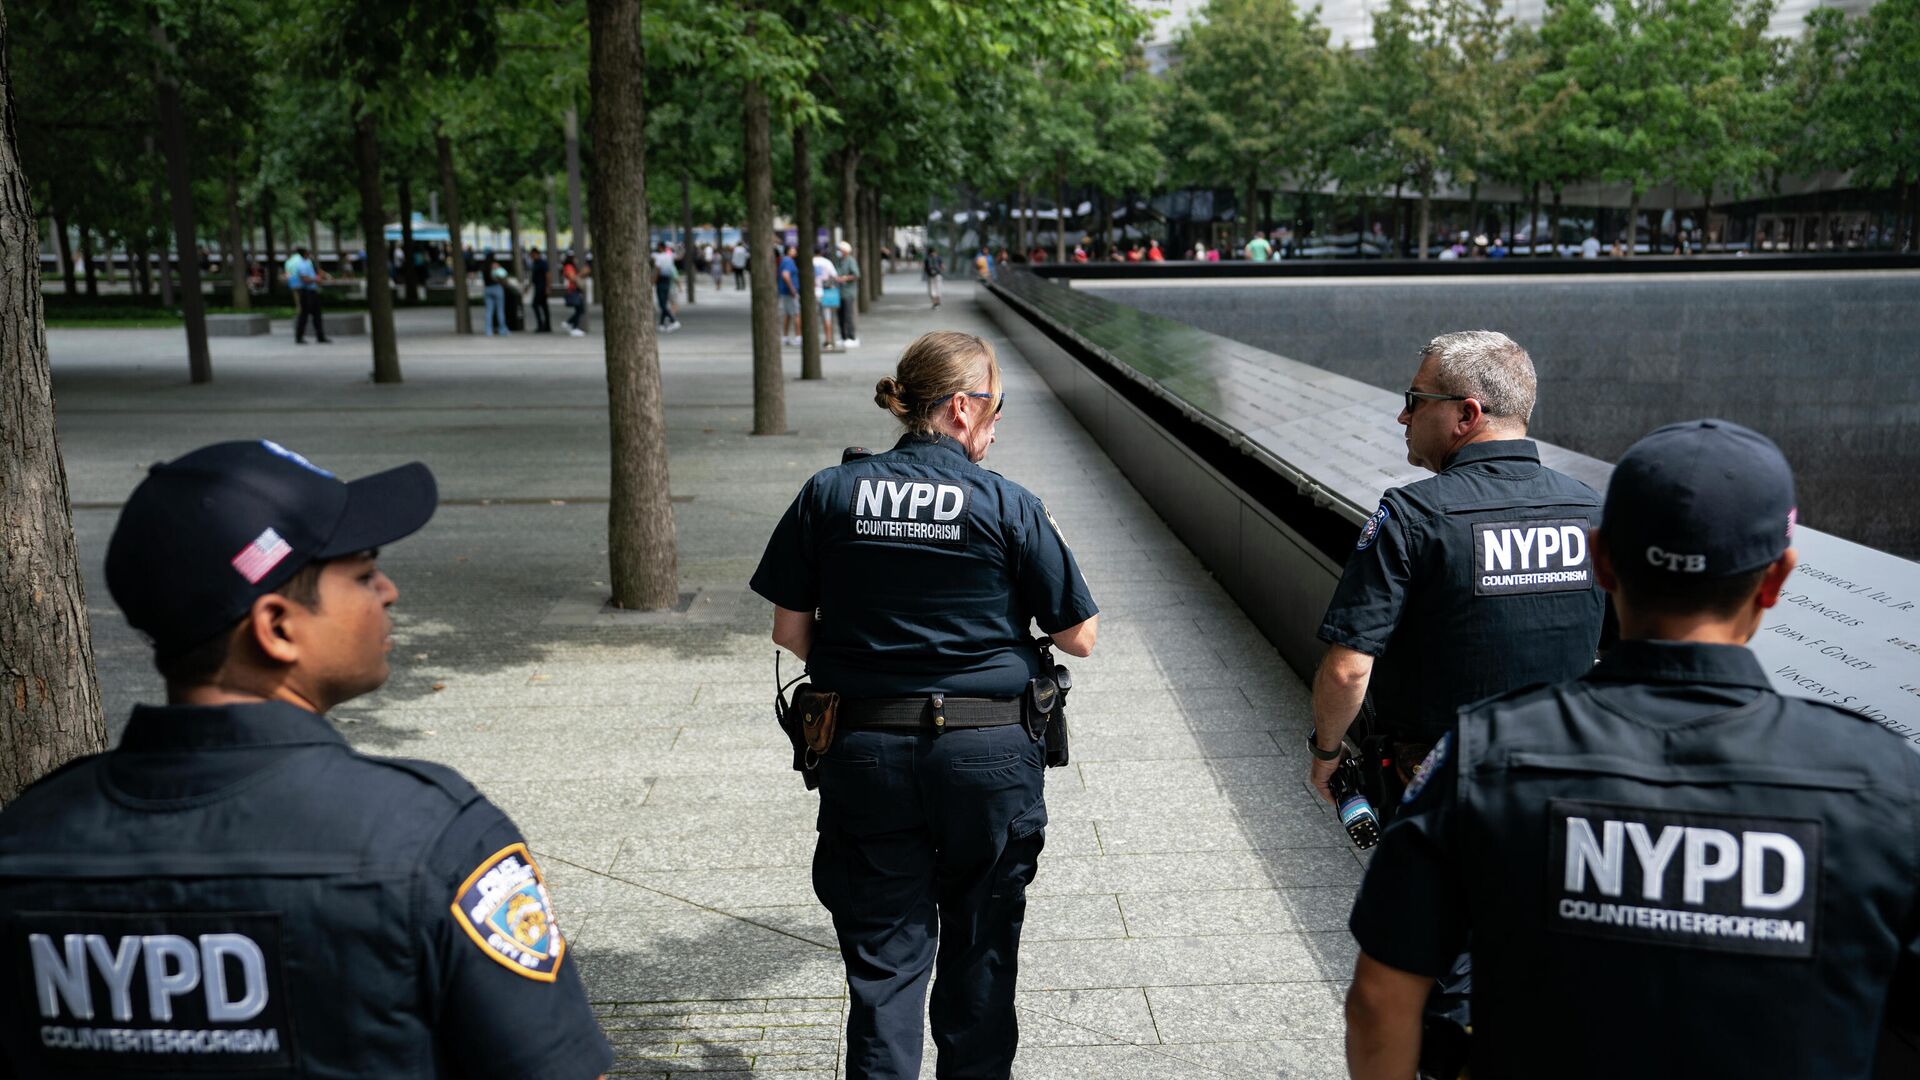 NYPD officer Michael Dougherty, a 25-year veteran, second from right, patrols with his colleagues beside the south reflecting pool of the 9/11 Memorial & Museum where names of his deceased colleagues and friends are displayed, Monday, Aug. 16, 2021, in New York.  - Sputnik International, 1920, 31.03.2023